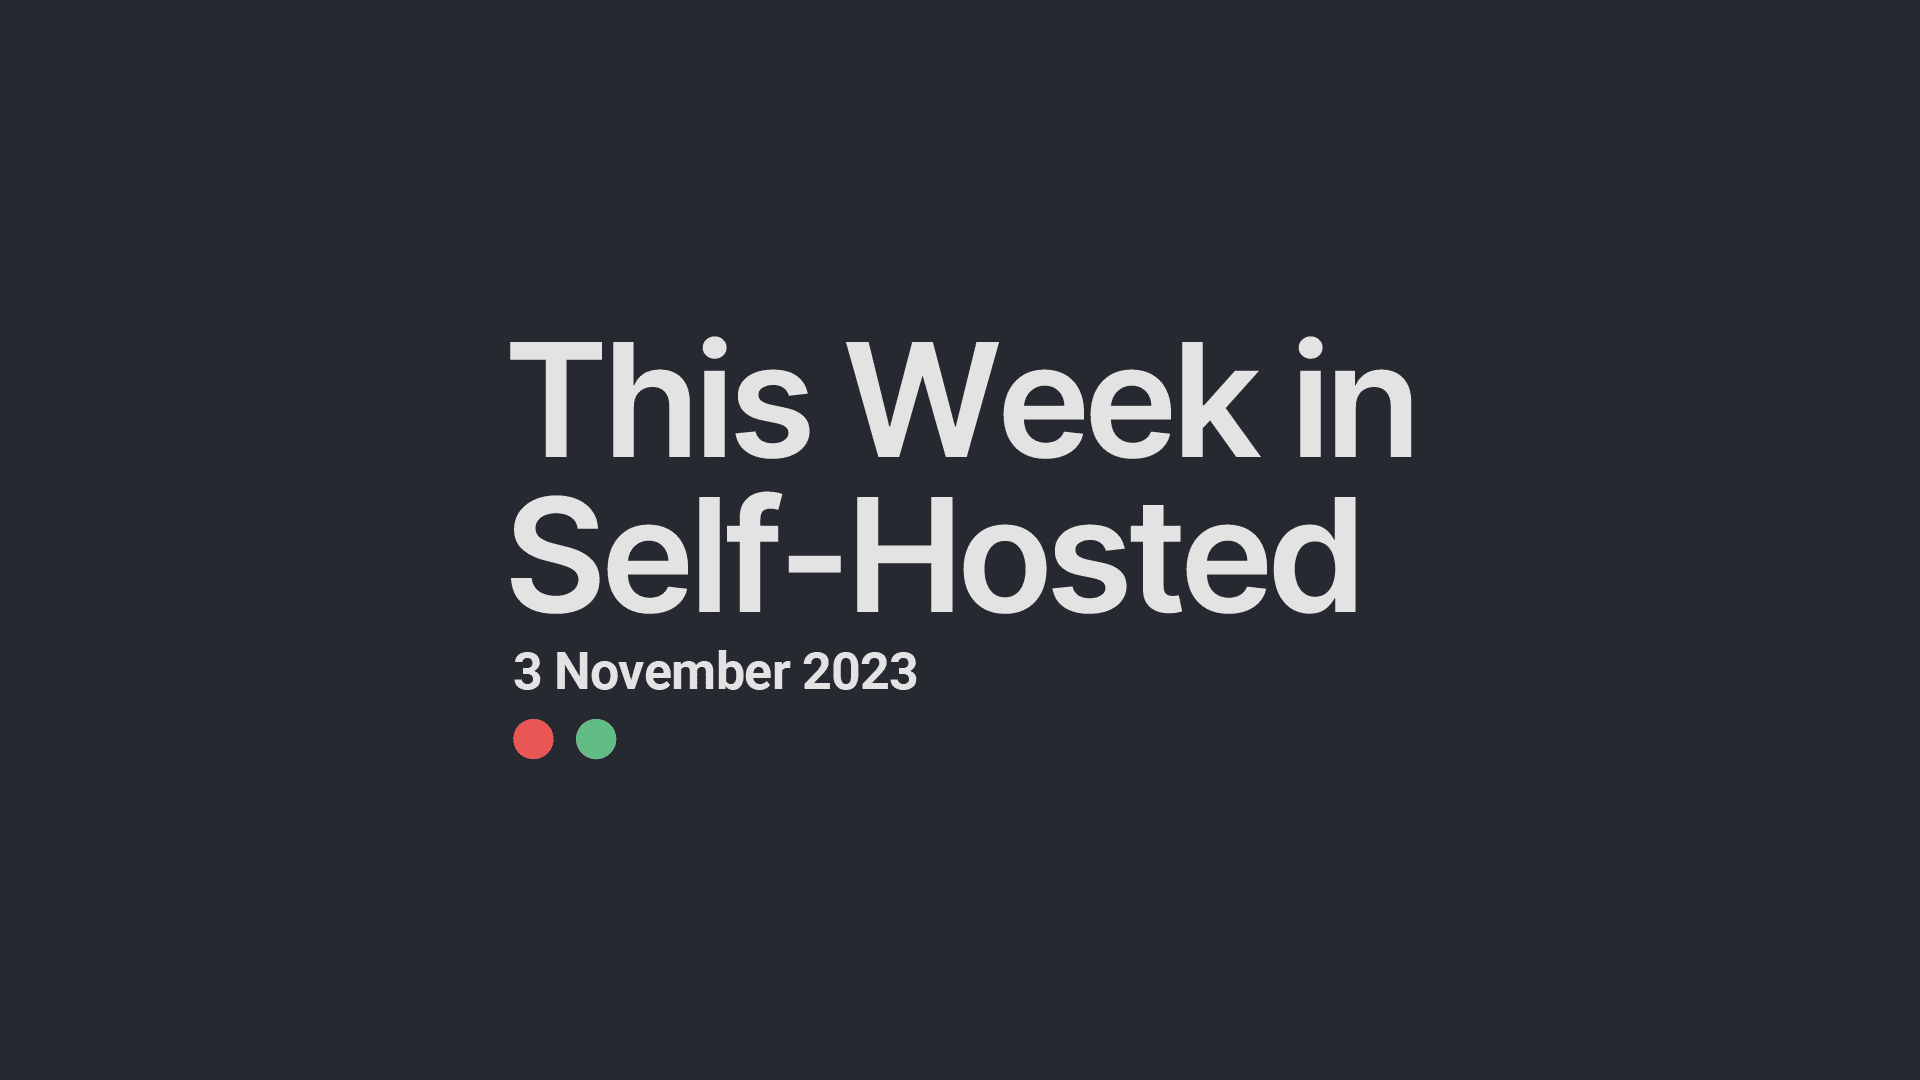 This Week in Self-Hosted (3 November 2023) Post image